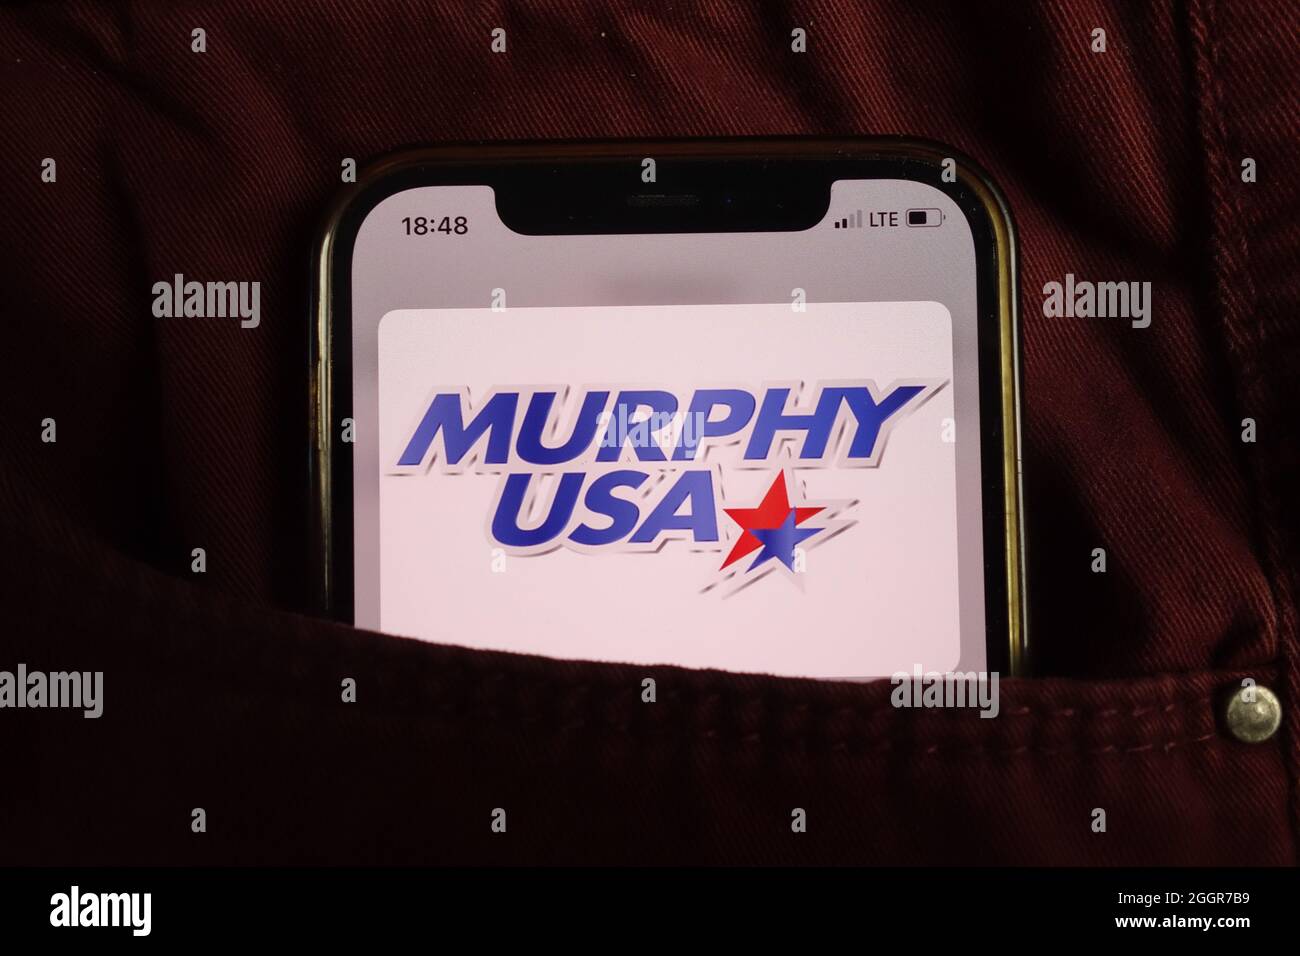 KONSKIE, POLAND - August 17, 2021: Murphy USA corporation logo displayed on mobile phone hidden in jeans pocket Stock Photo